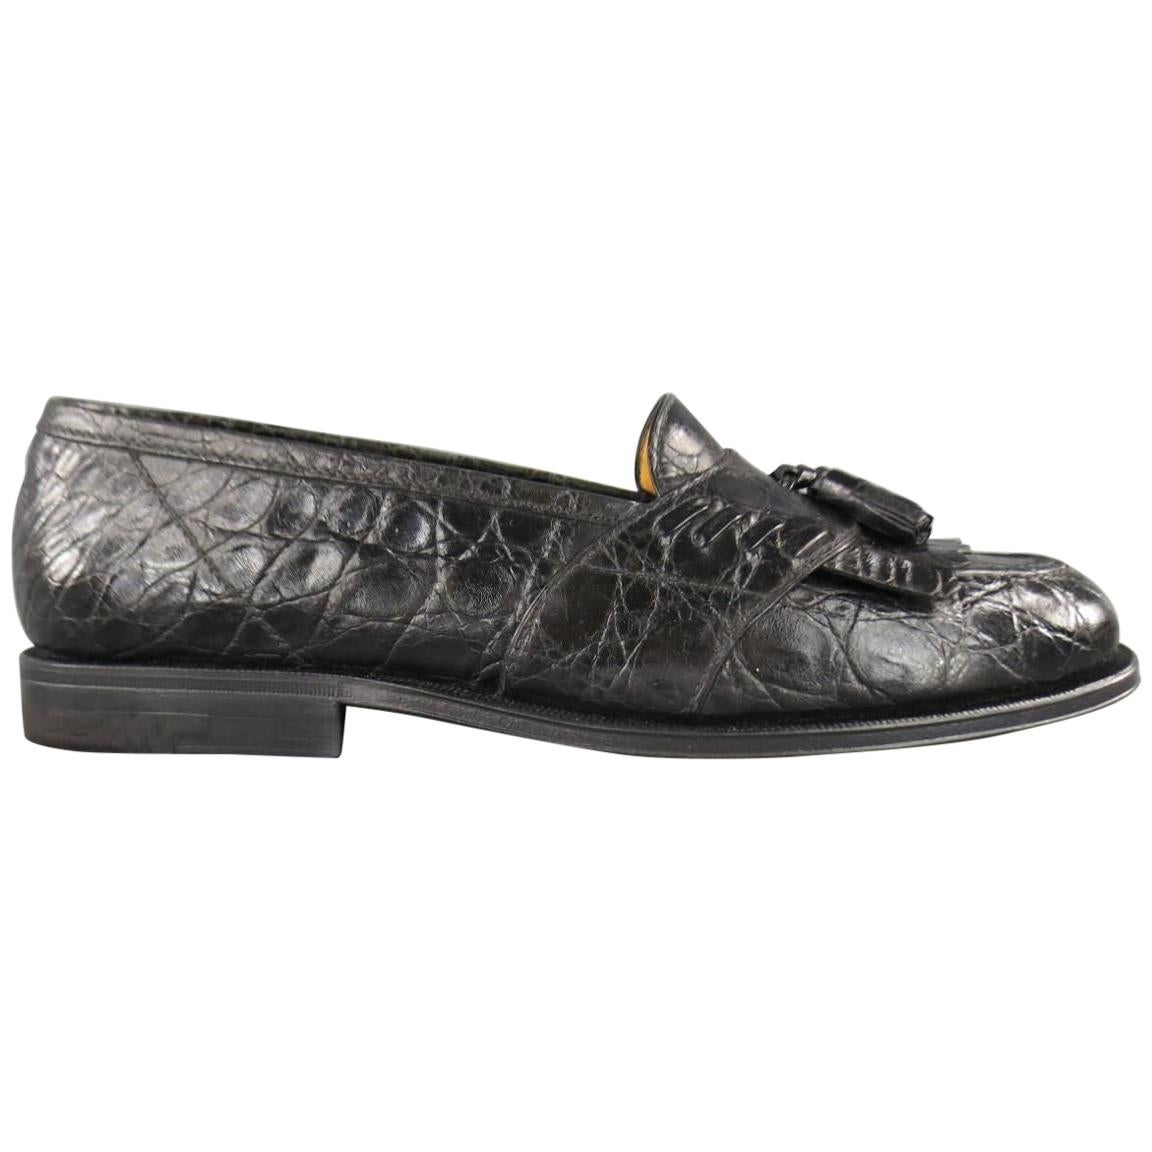 A.TESTONI for Wilkes Bashford 8.5 Black Textured Alligator Leather Loafers Shoes